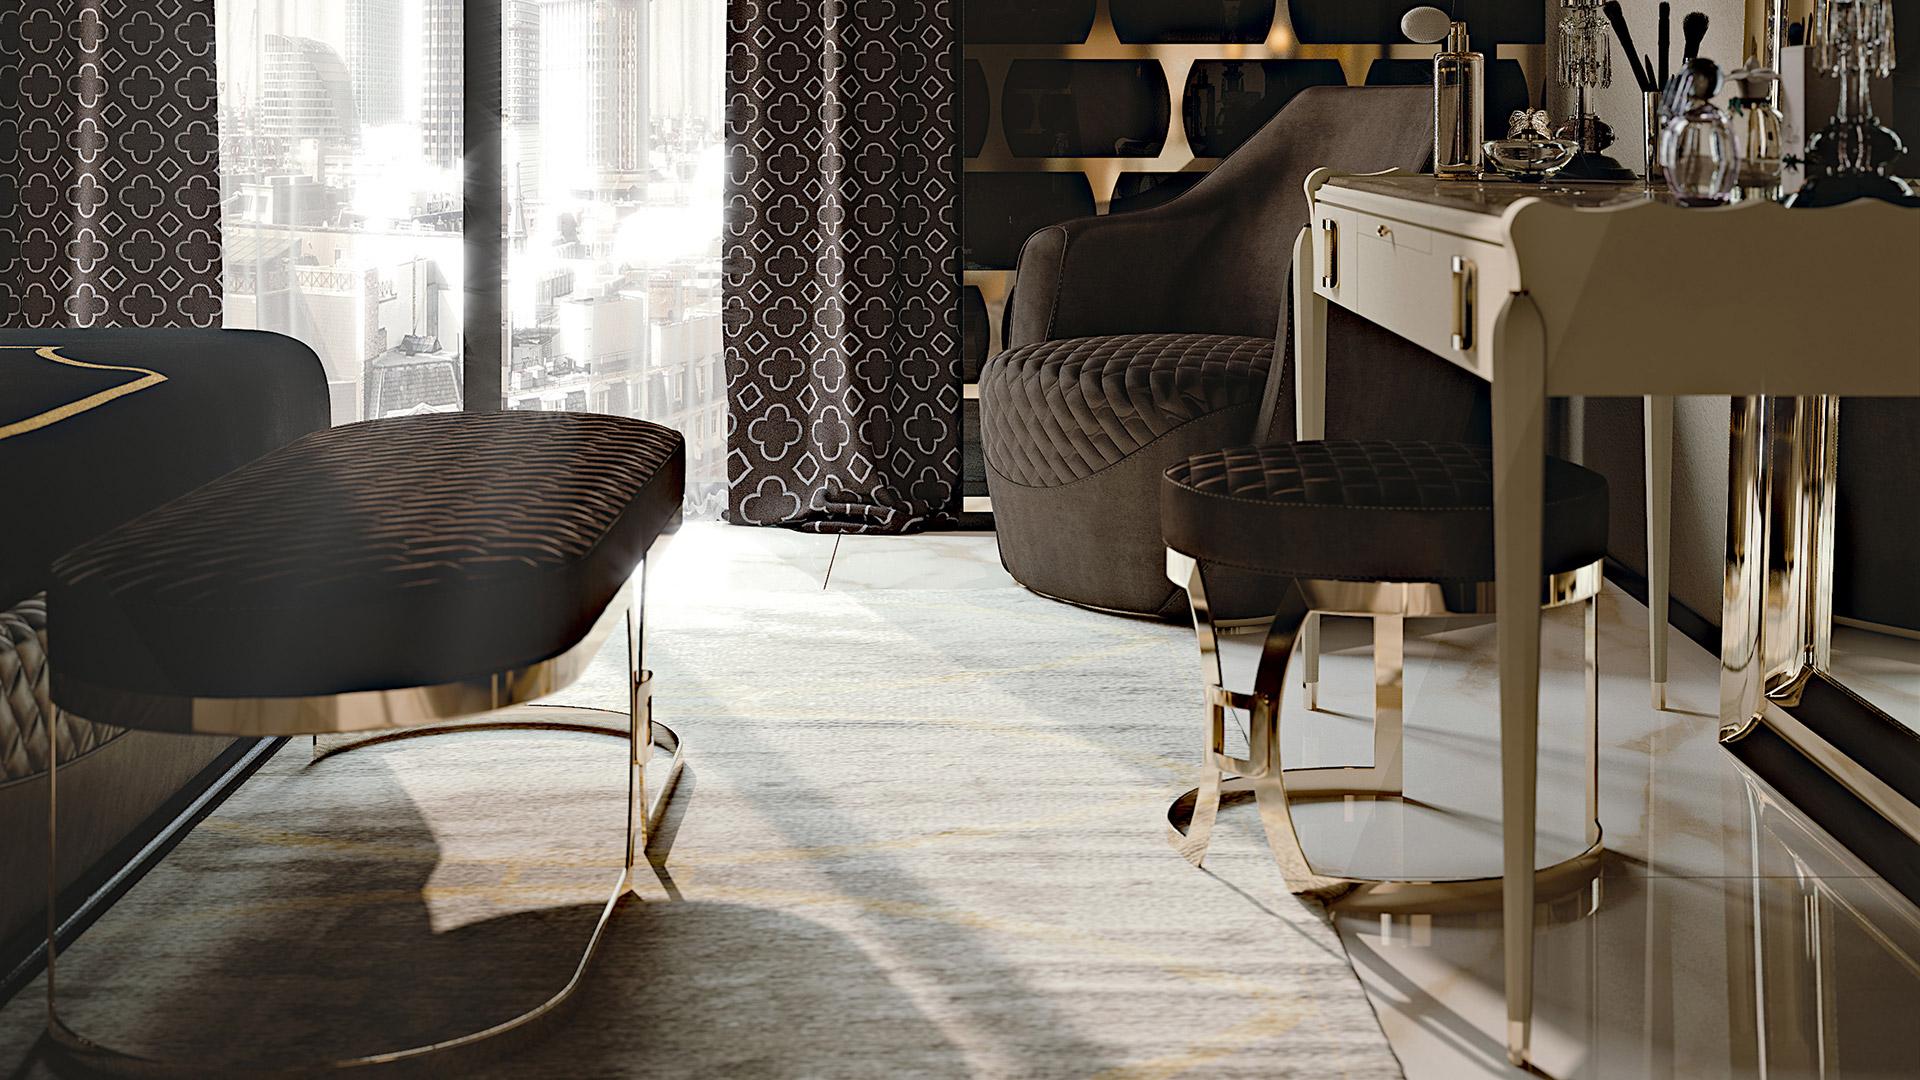 Pouff characterized by a golden finished metal base that gives a Modern and Contemporary feeling to the armchair.
A soft padding perfectly shaped enhances the comfort to create an unique piece thanks also to the vertical stitchings, making it more